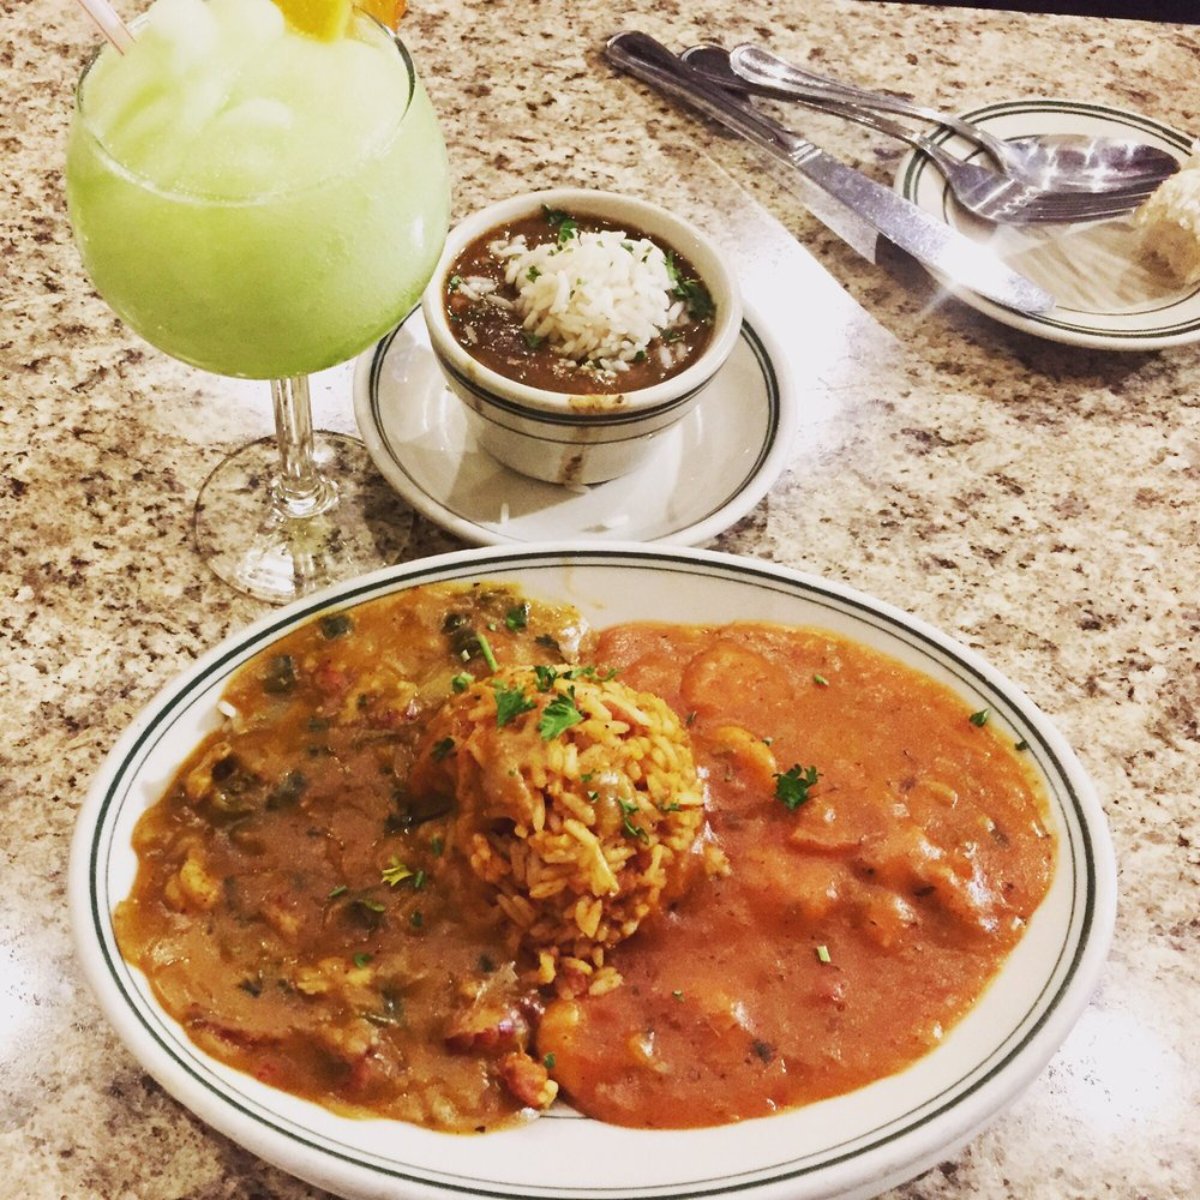 A plate of gumbo and a daiquiri